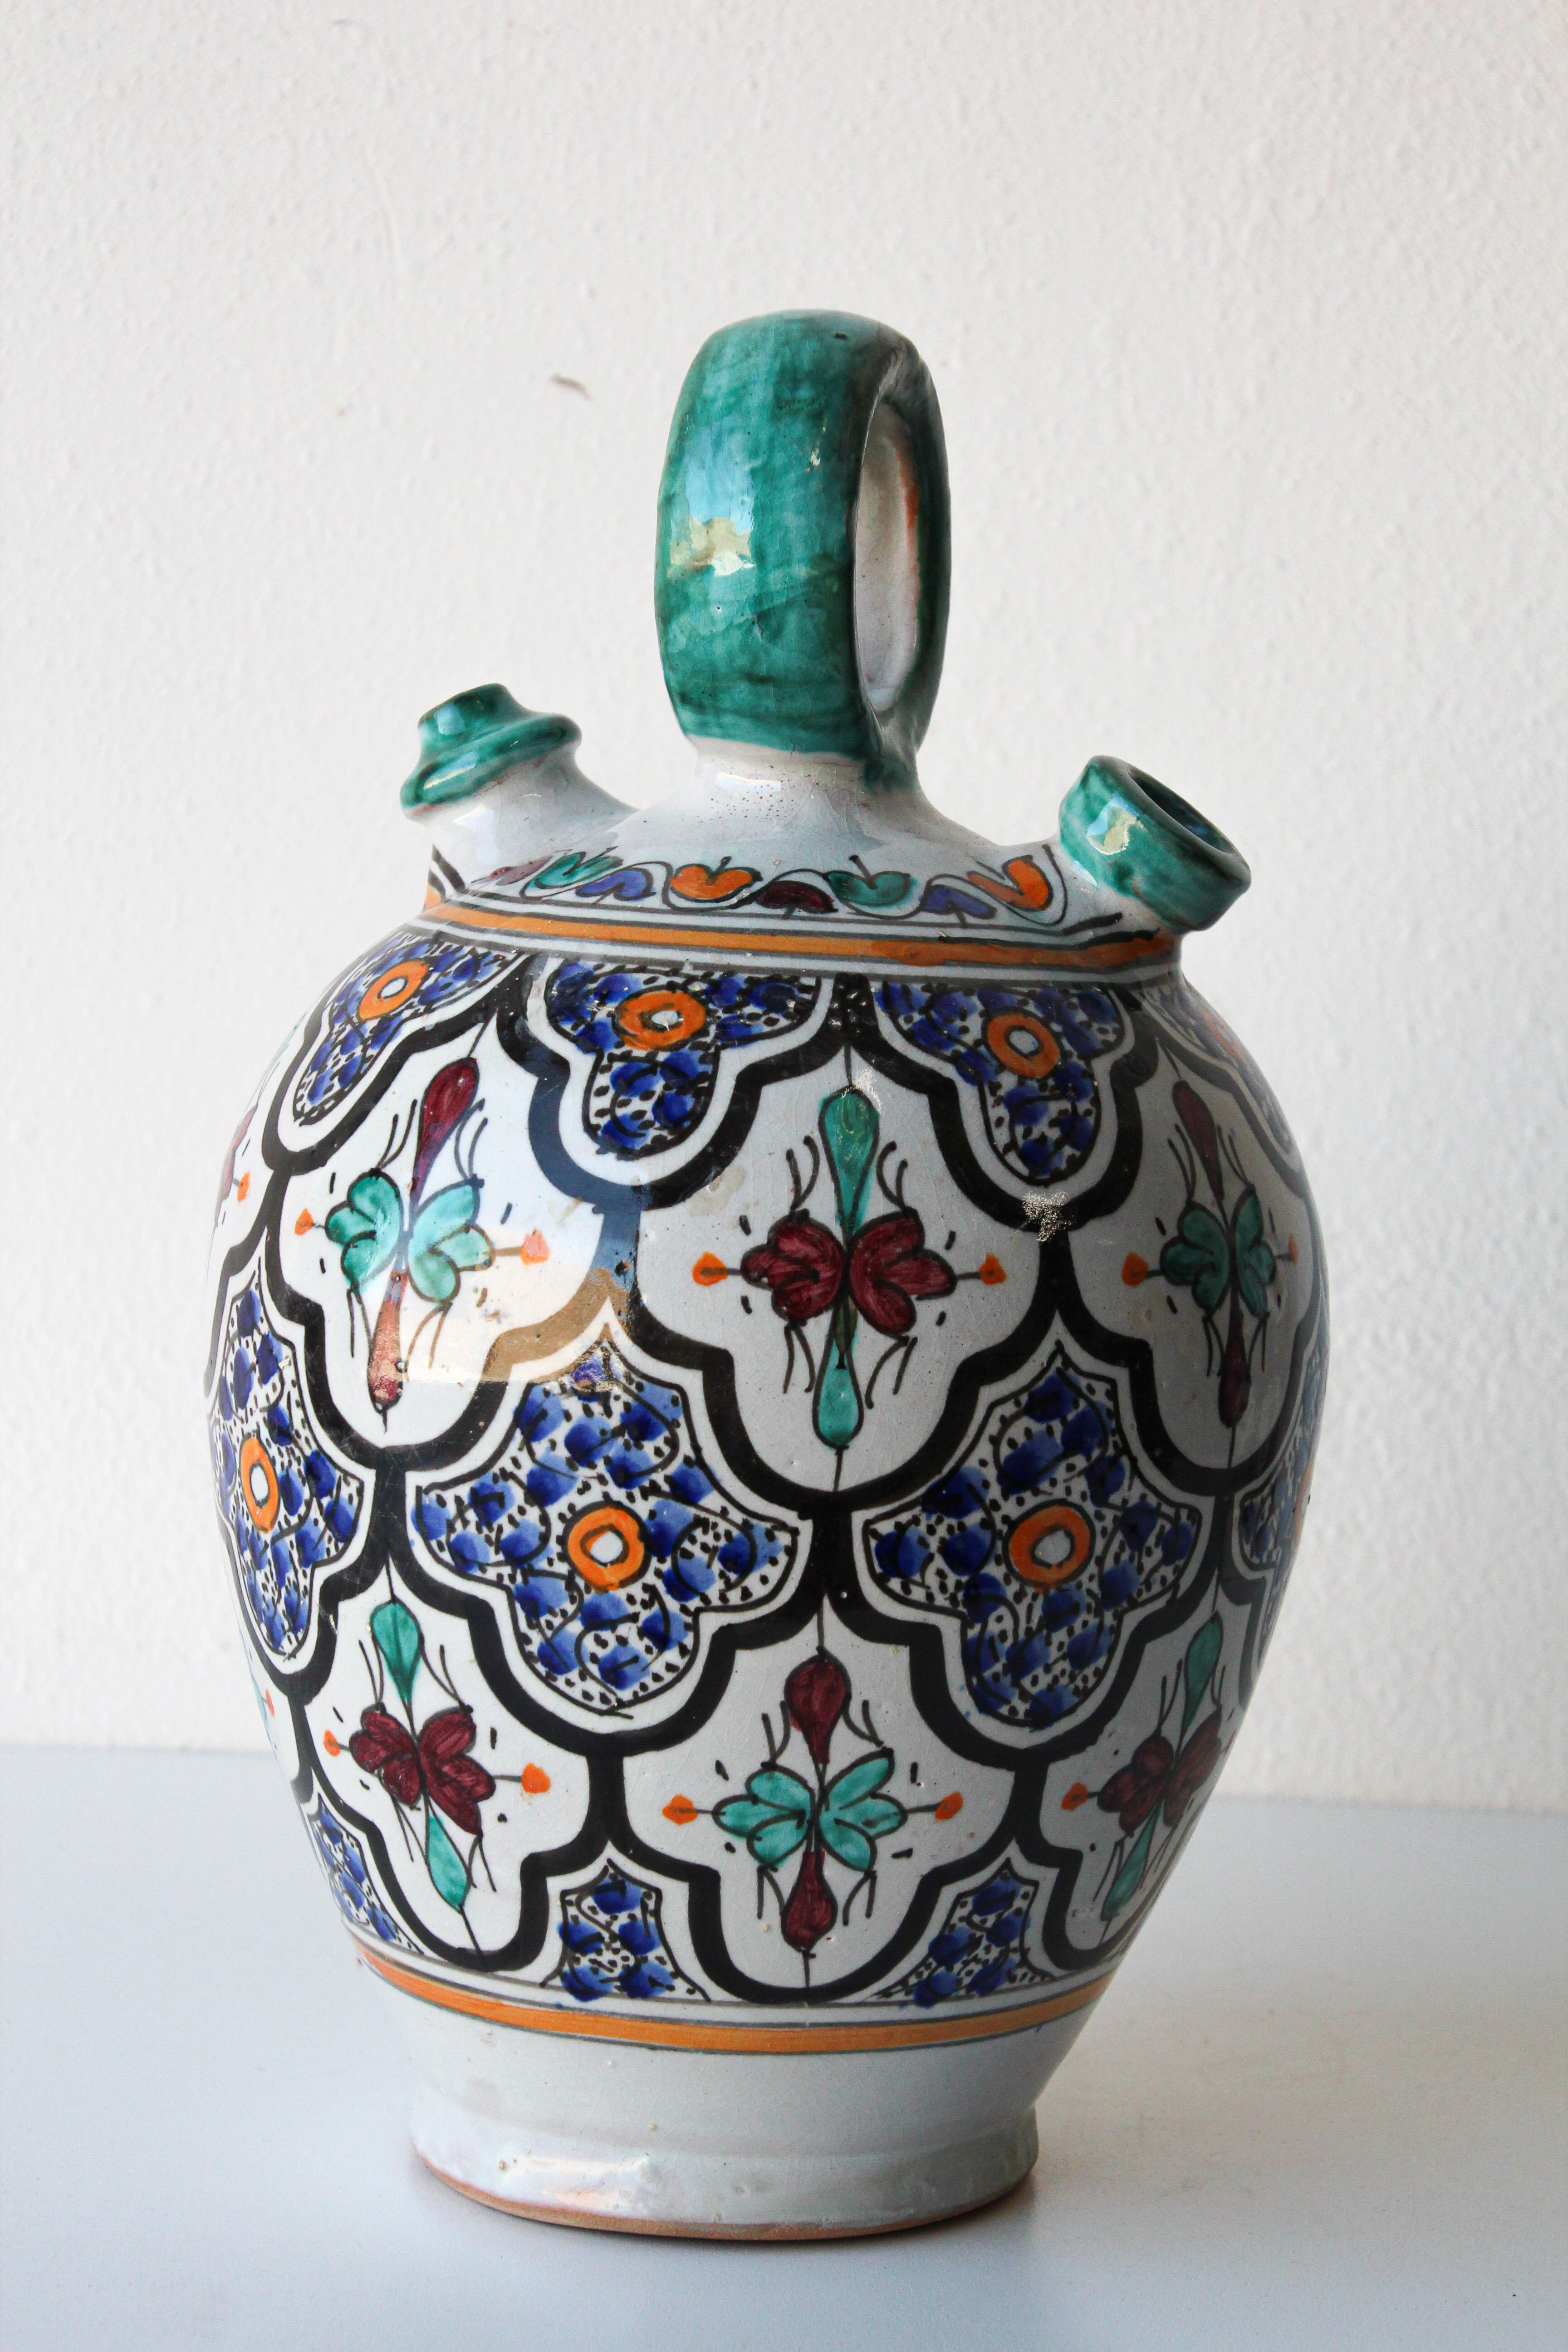 Moorish Ceramic Glazed Water Jug Handcrafted in Fez Morocco In Good Condition For Sale In North Hollywood, CA